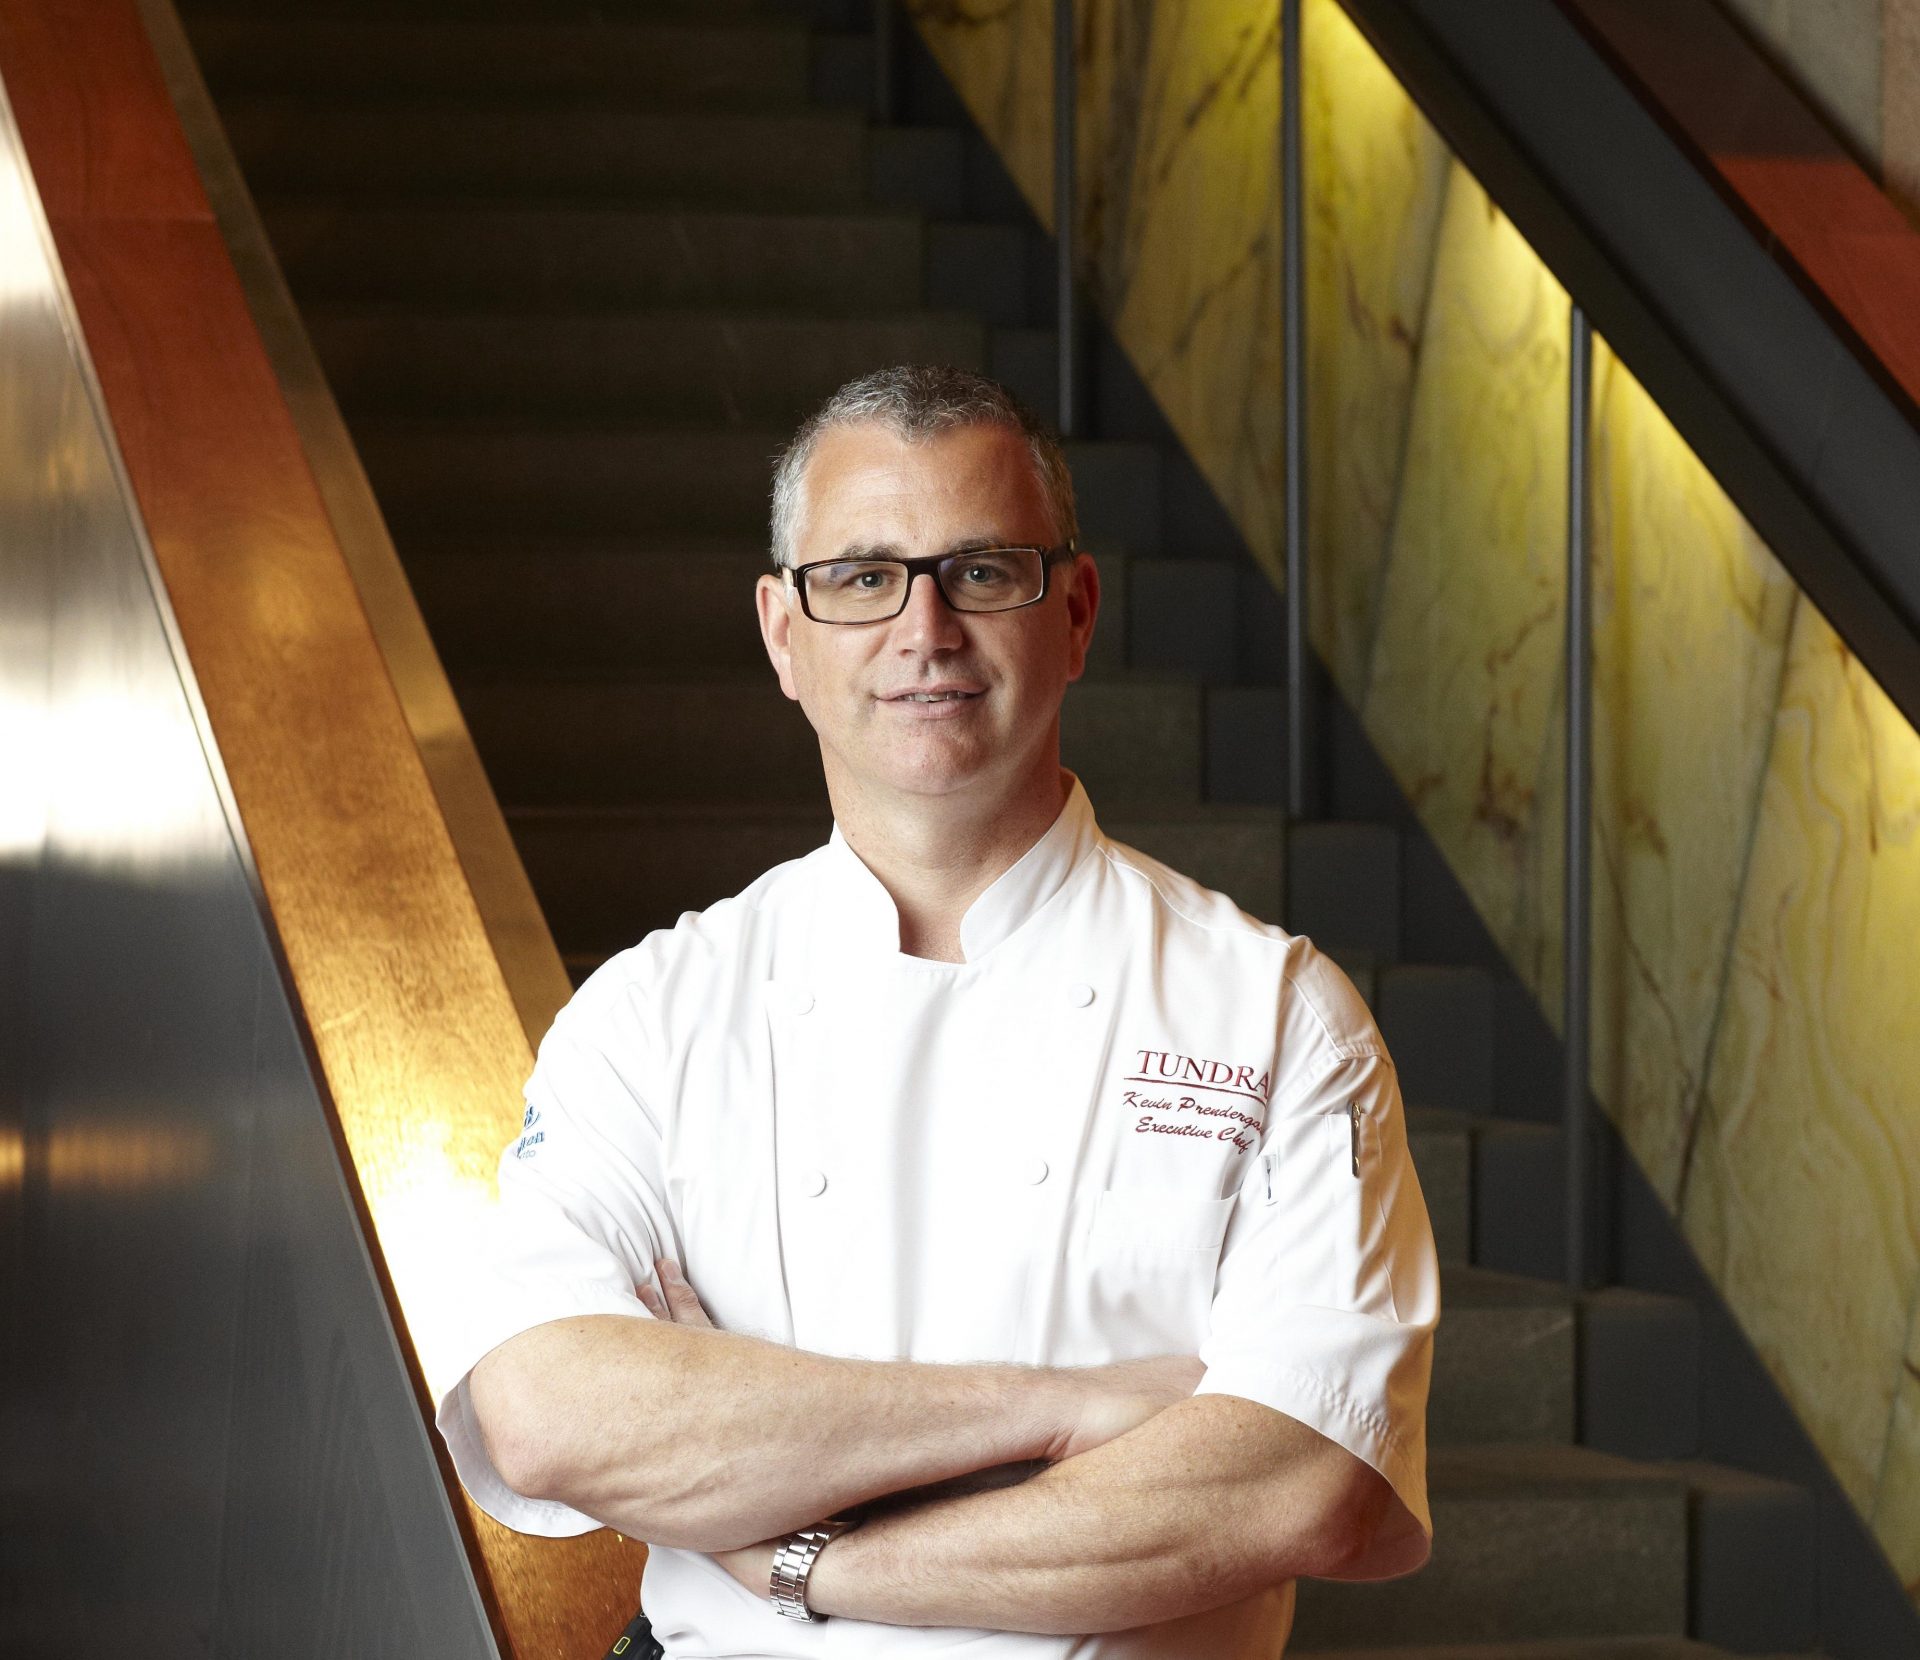 Raising A Healthy Appetite : A Novel Approach With Chef Kevin Prendergrast